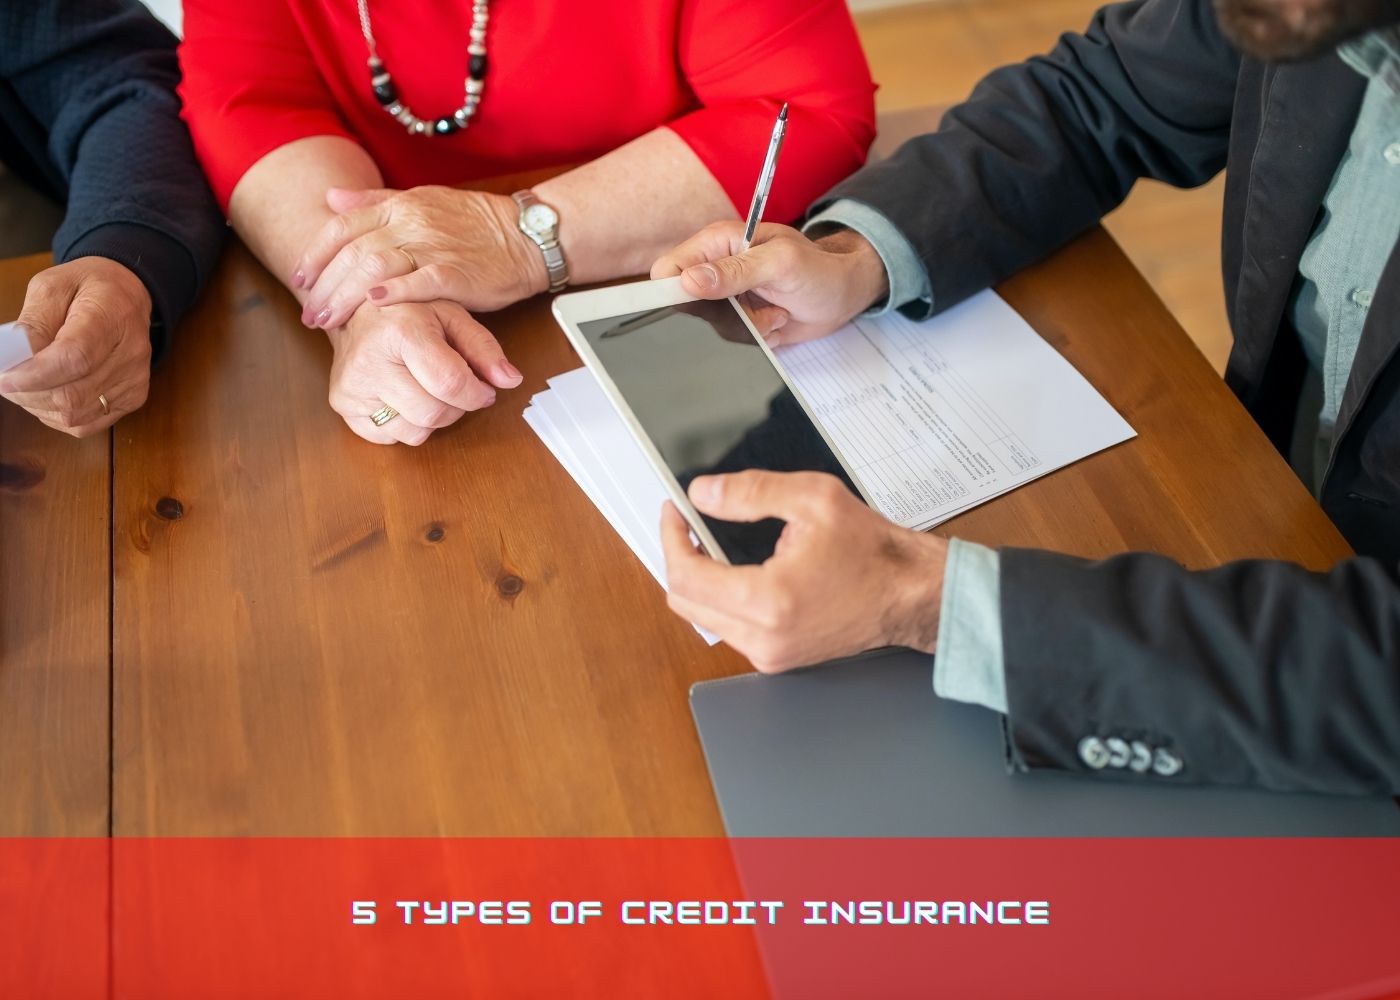 5 types of Credit Insurance